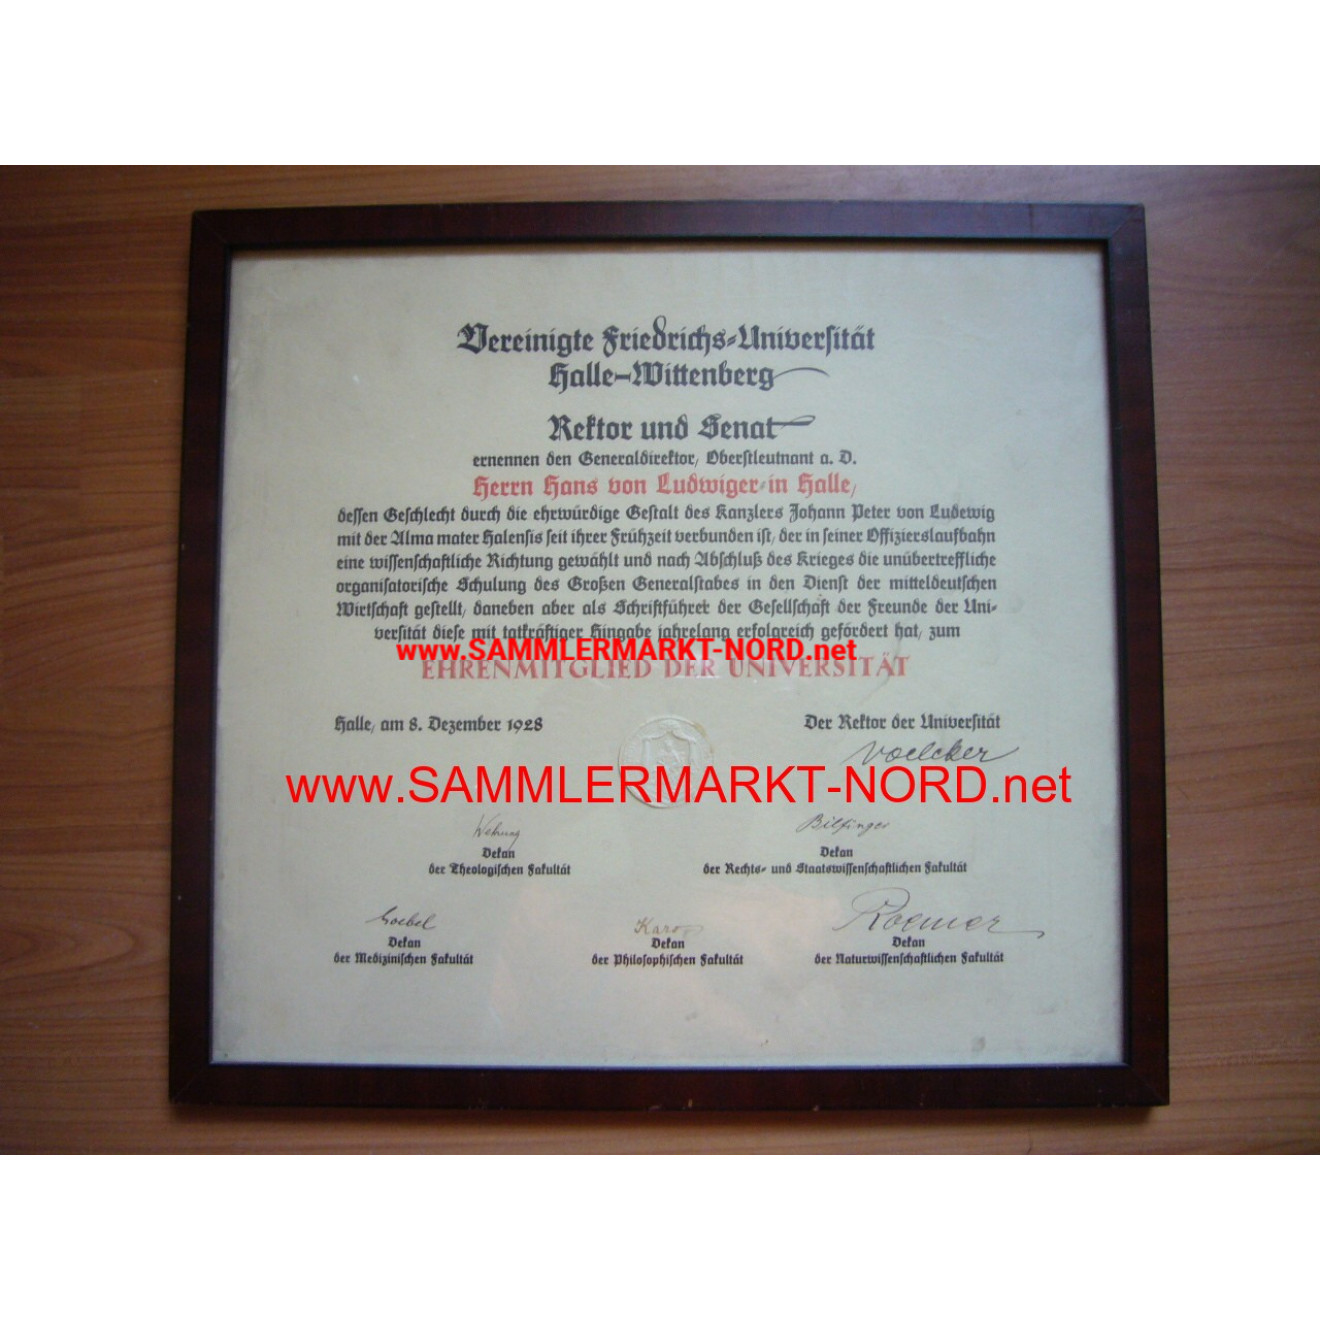 Certificate for honorary membership of the United Friedrichs Uni